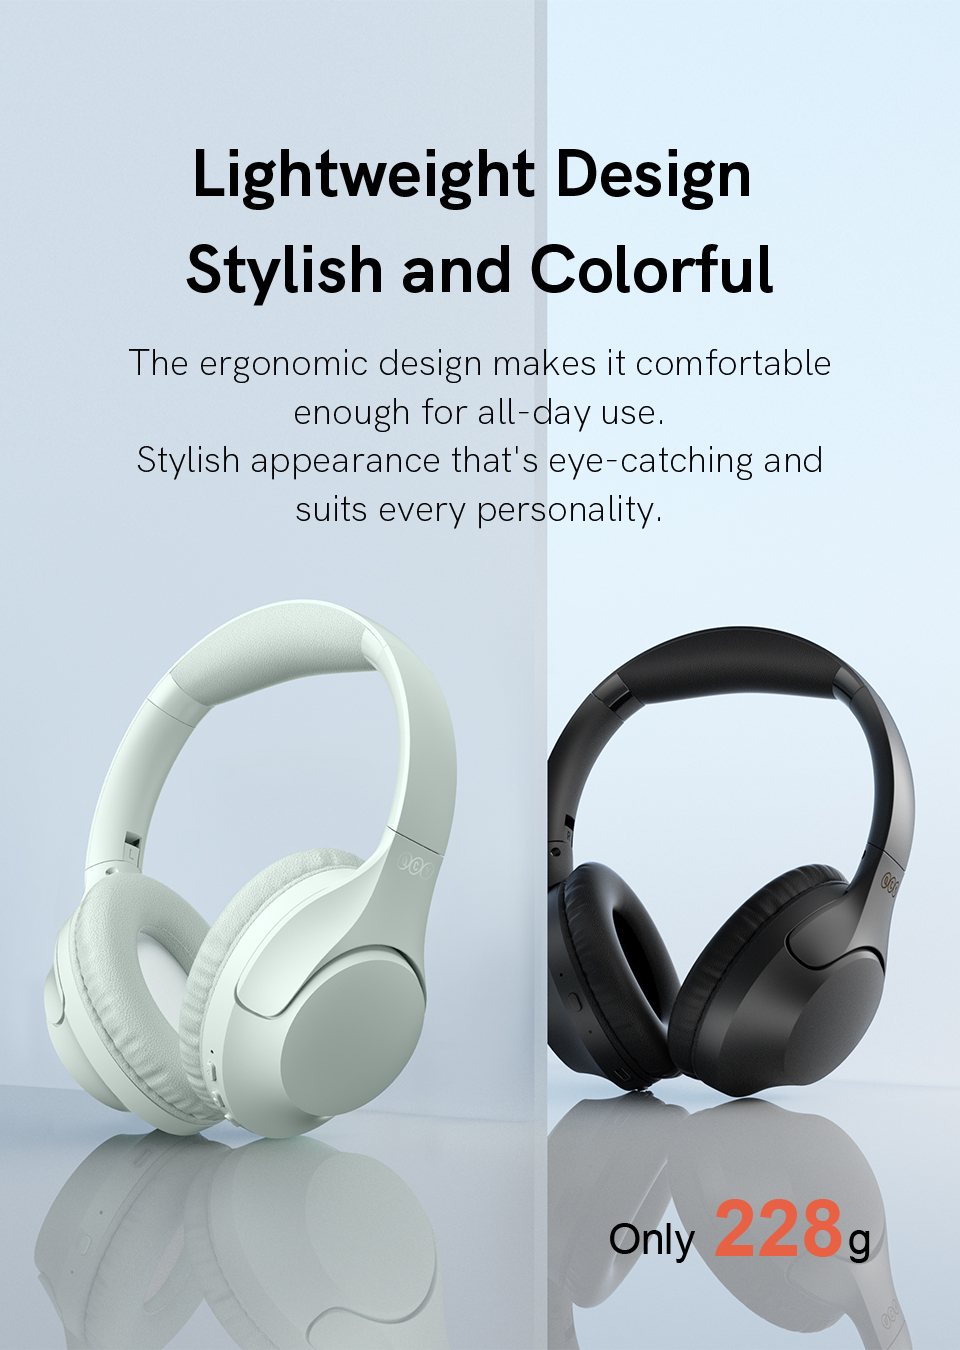 QCY H2 Wireless Headphones with Bluetooth 5.3